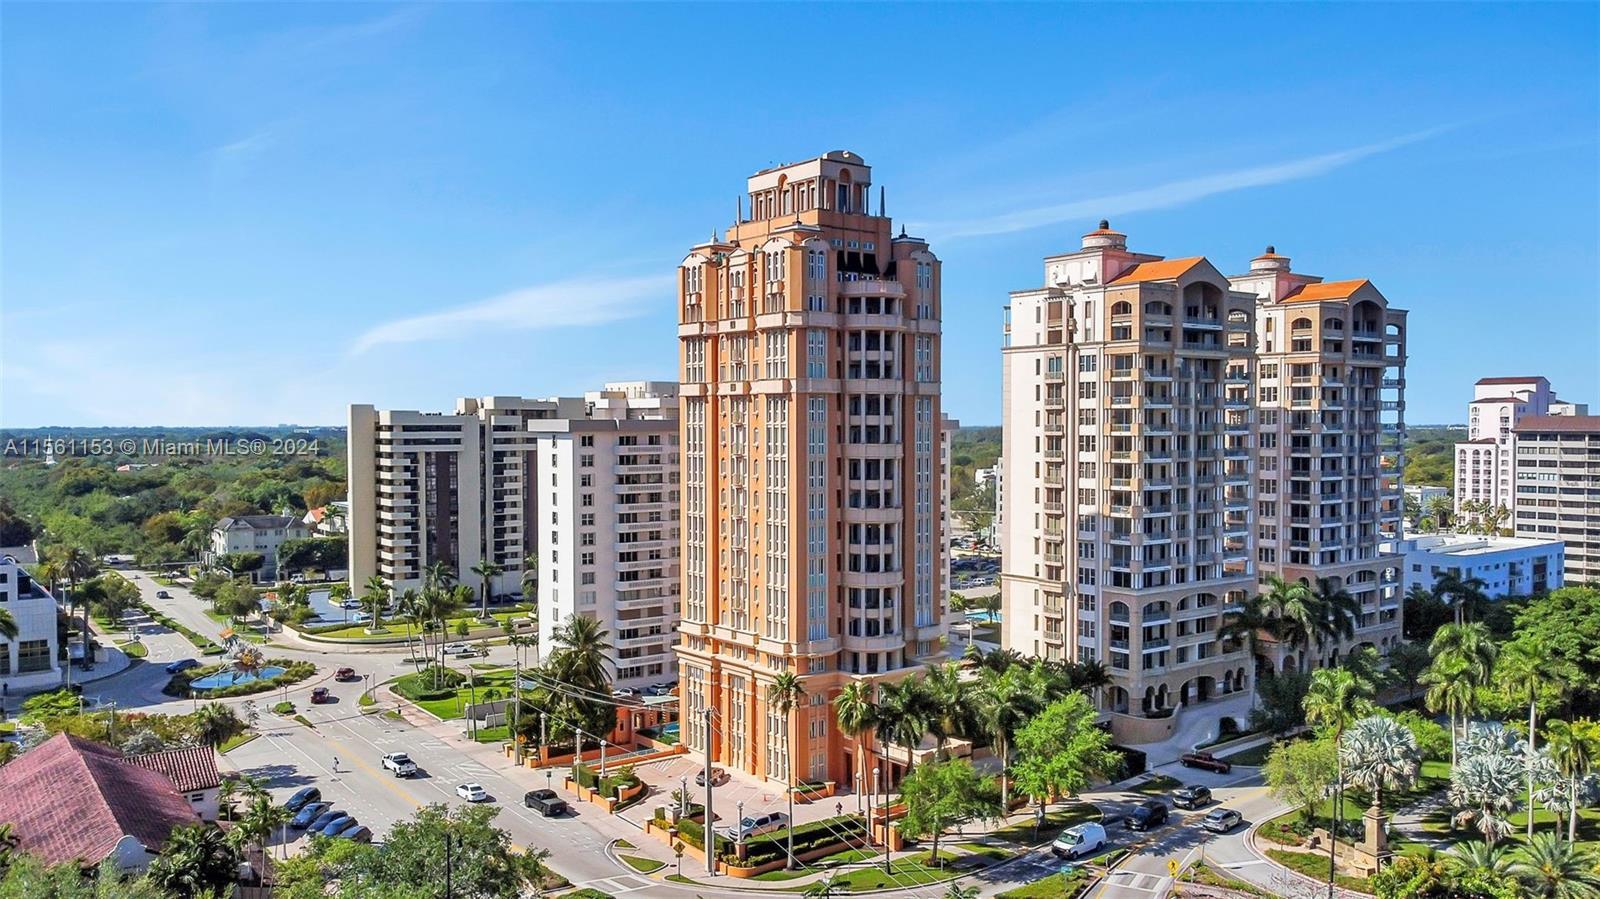 Nestled in the heart of Coral Gables, the Segovia Tower Condo epitomizes elegance and sophistication